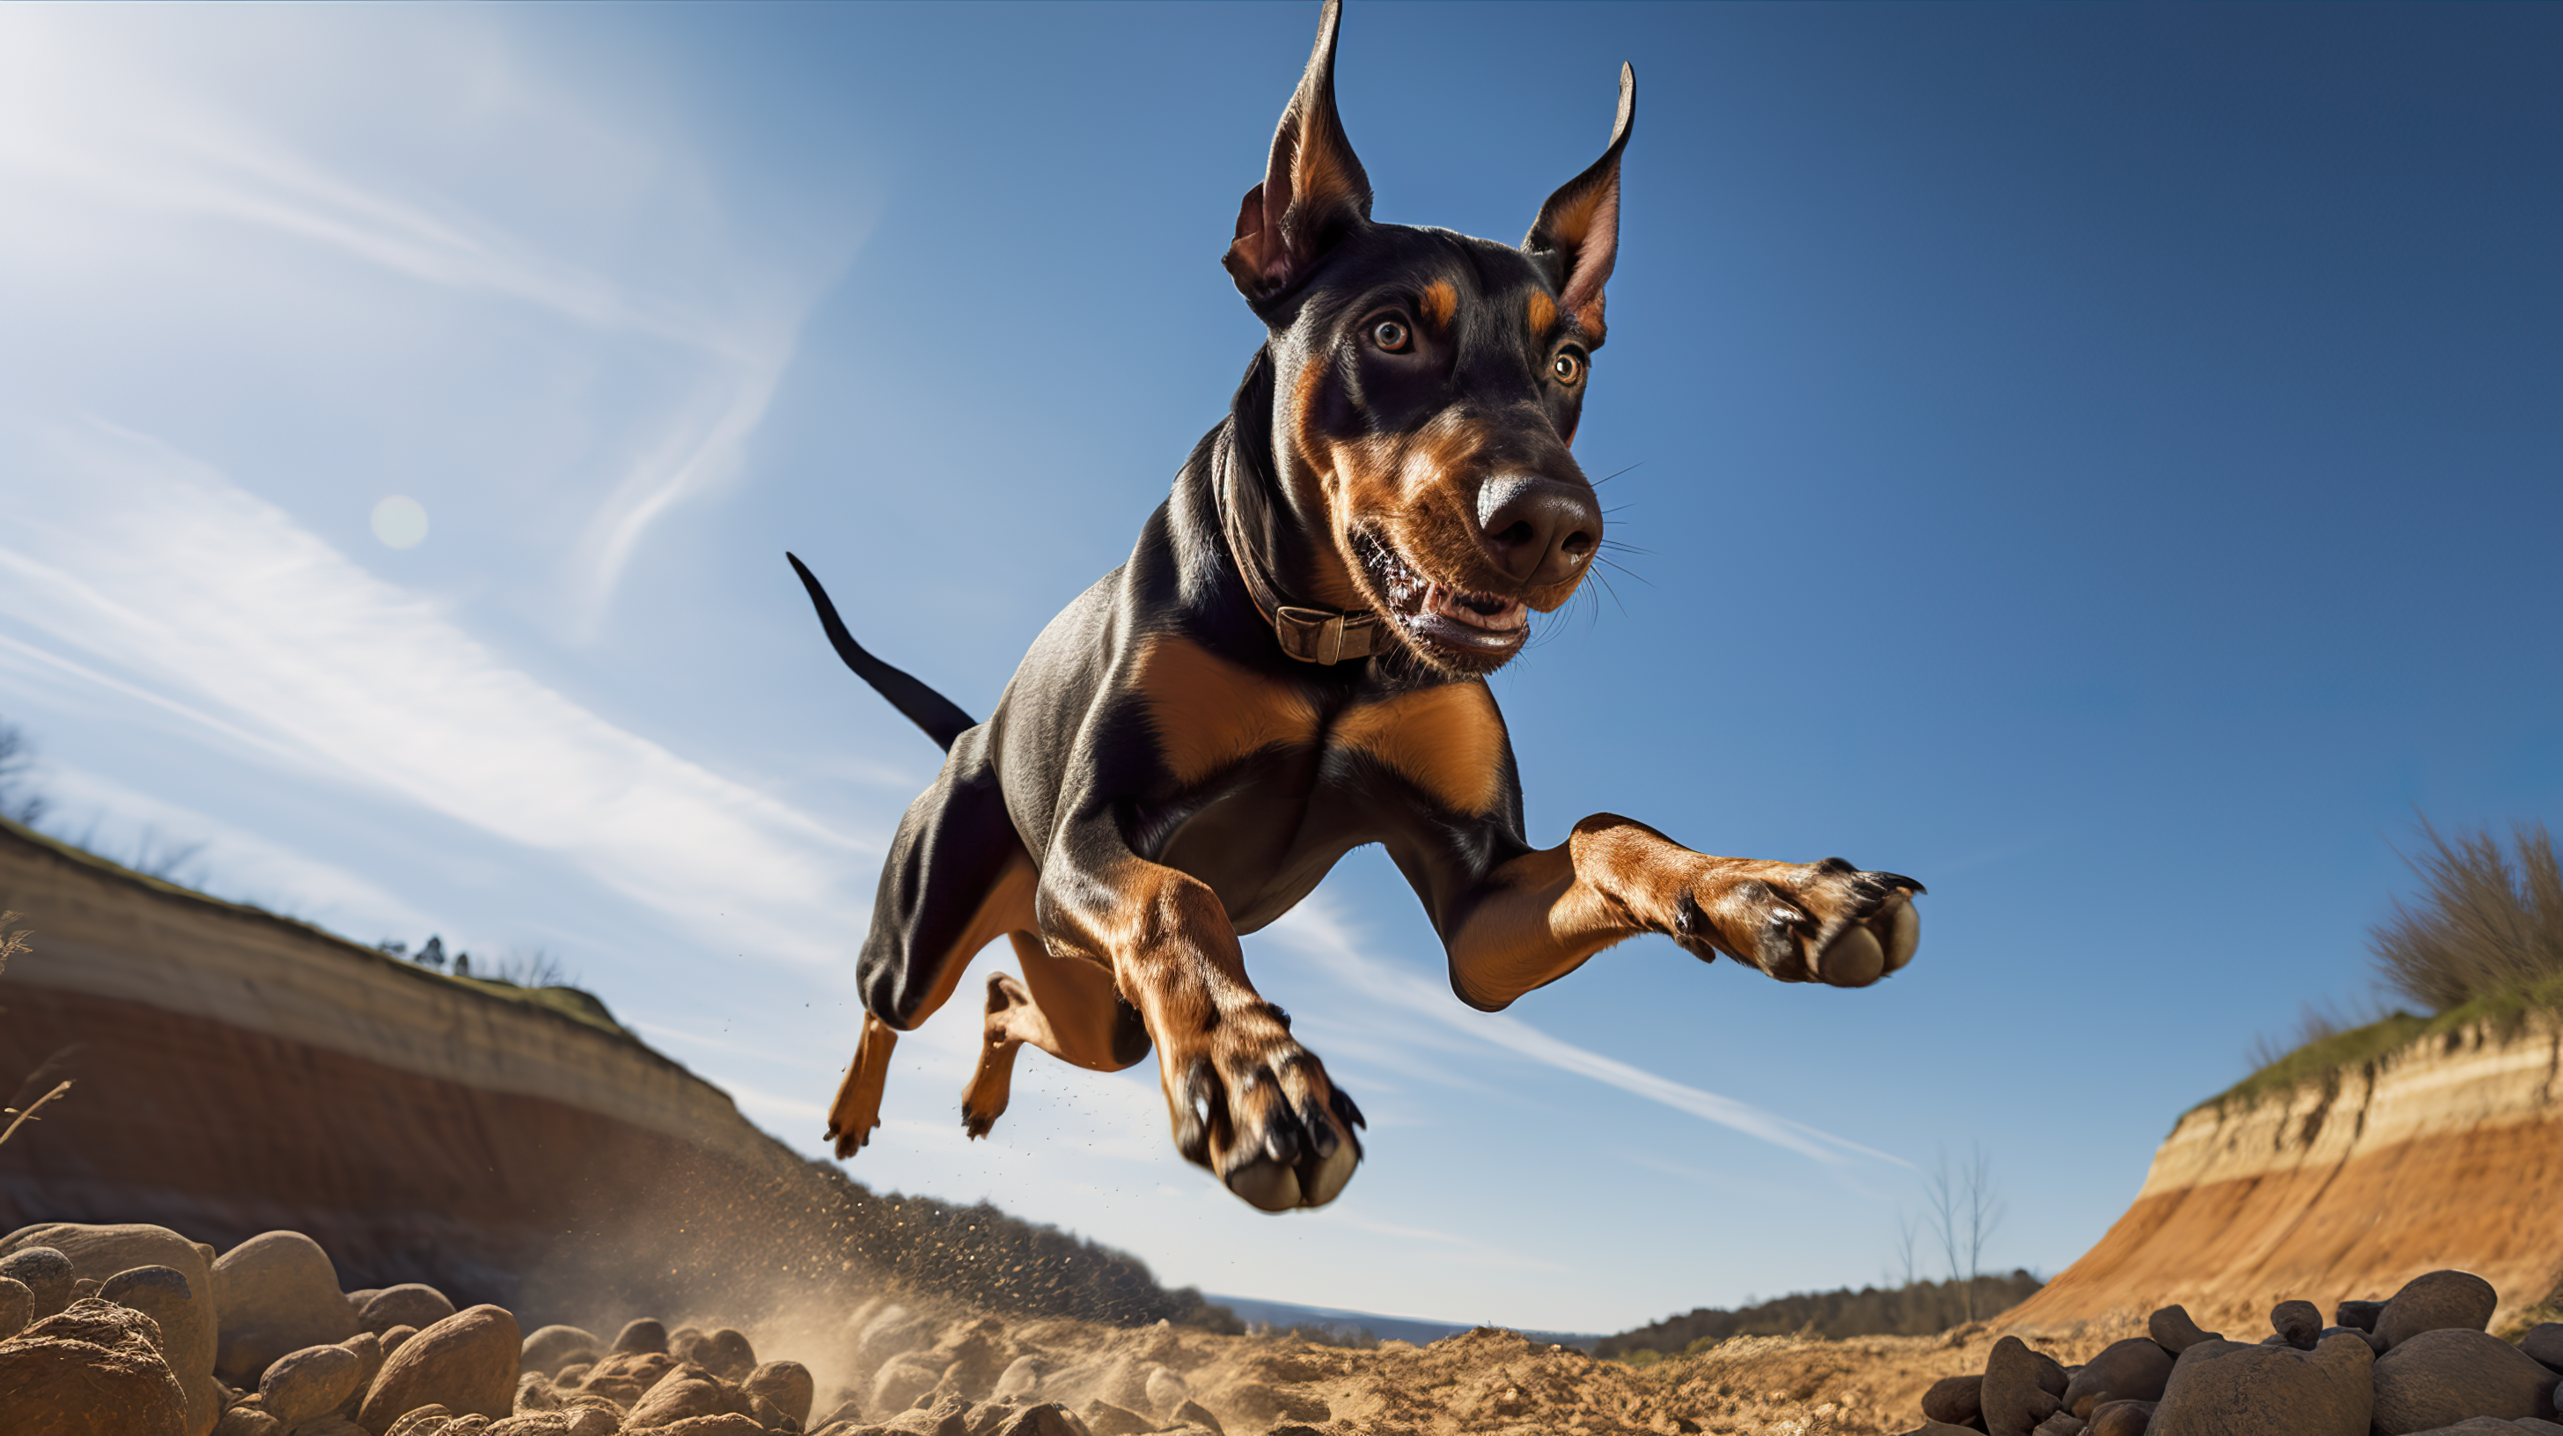 HD desktop wallpaper of a dynamic Doberman Pinscher mid-air in a leap with a clear blue sky and rugged terrain in the background.